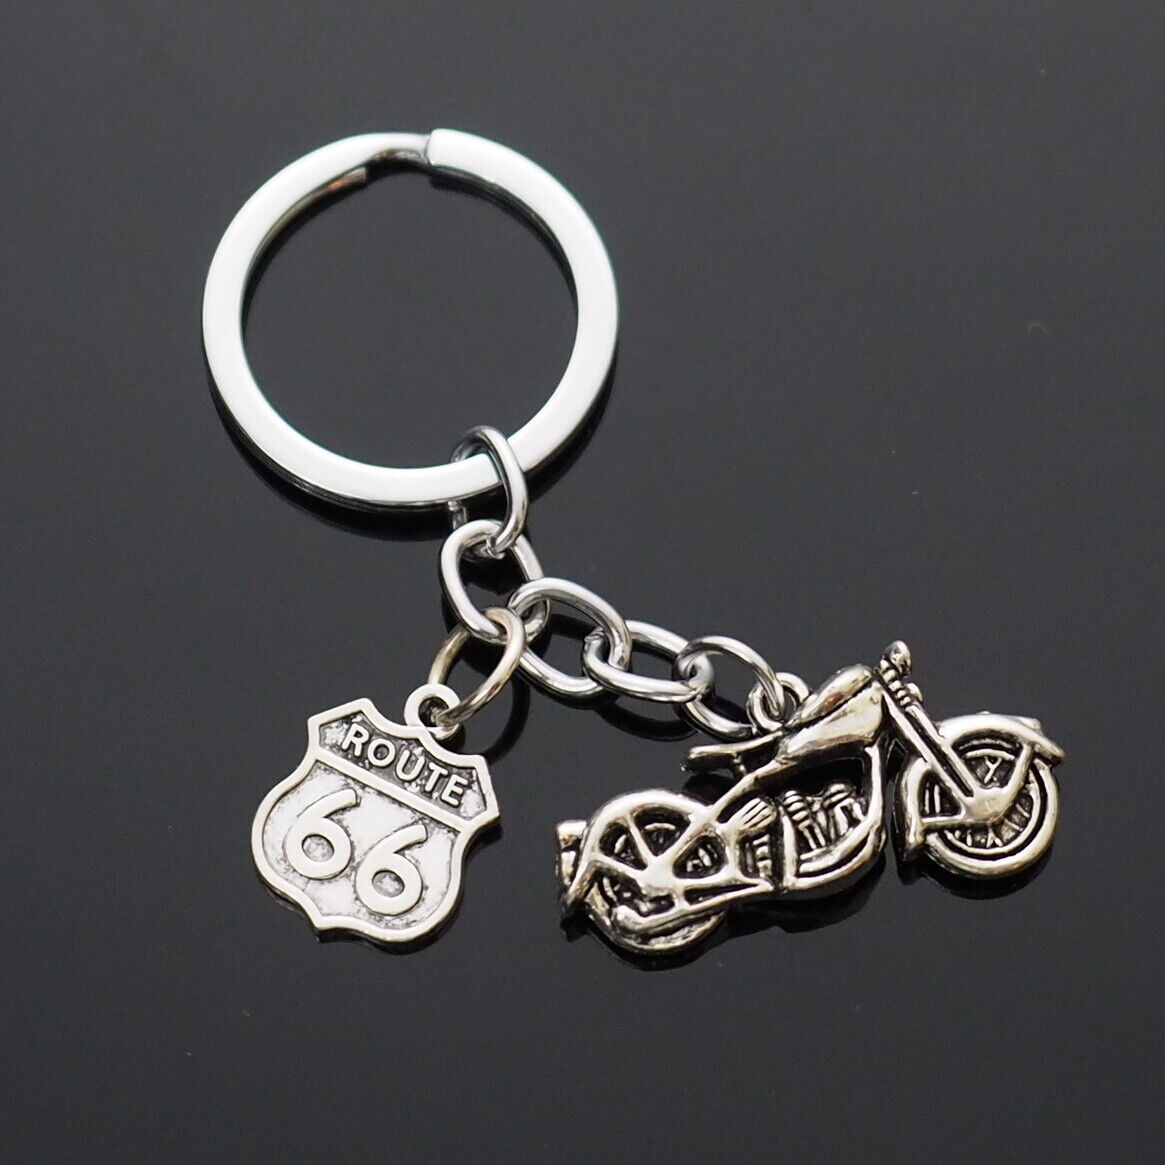 Motorcycle Key Chain Route 66 Charm Classic Antique Vintage Look Keychain Gift